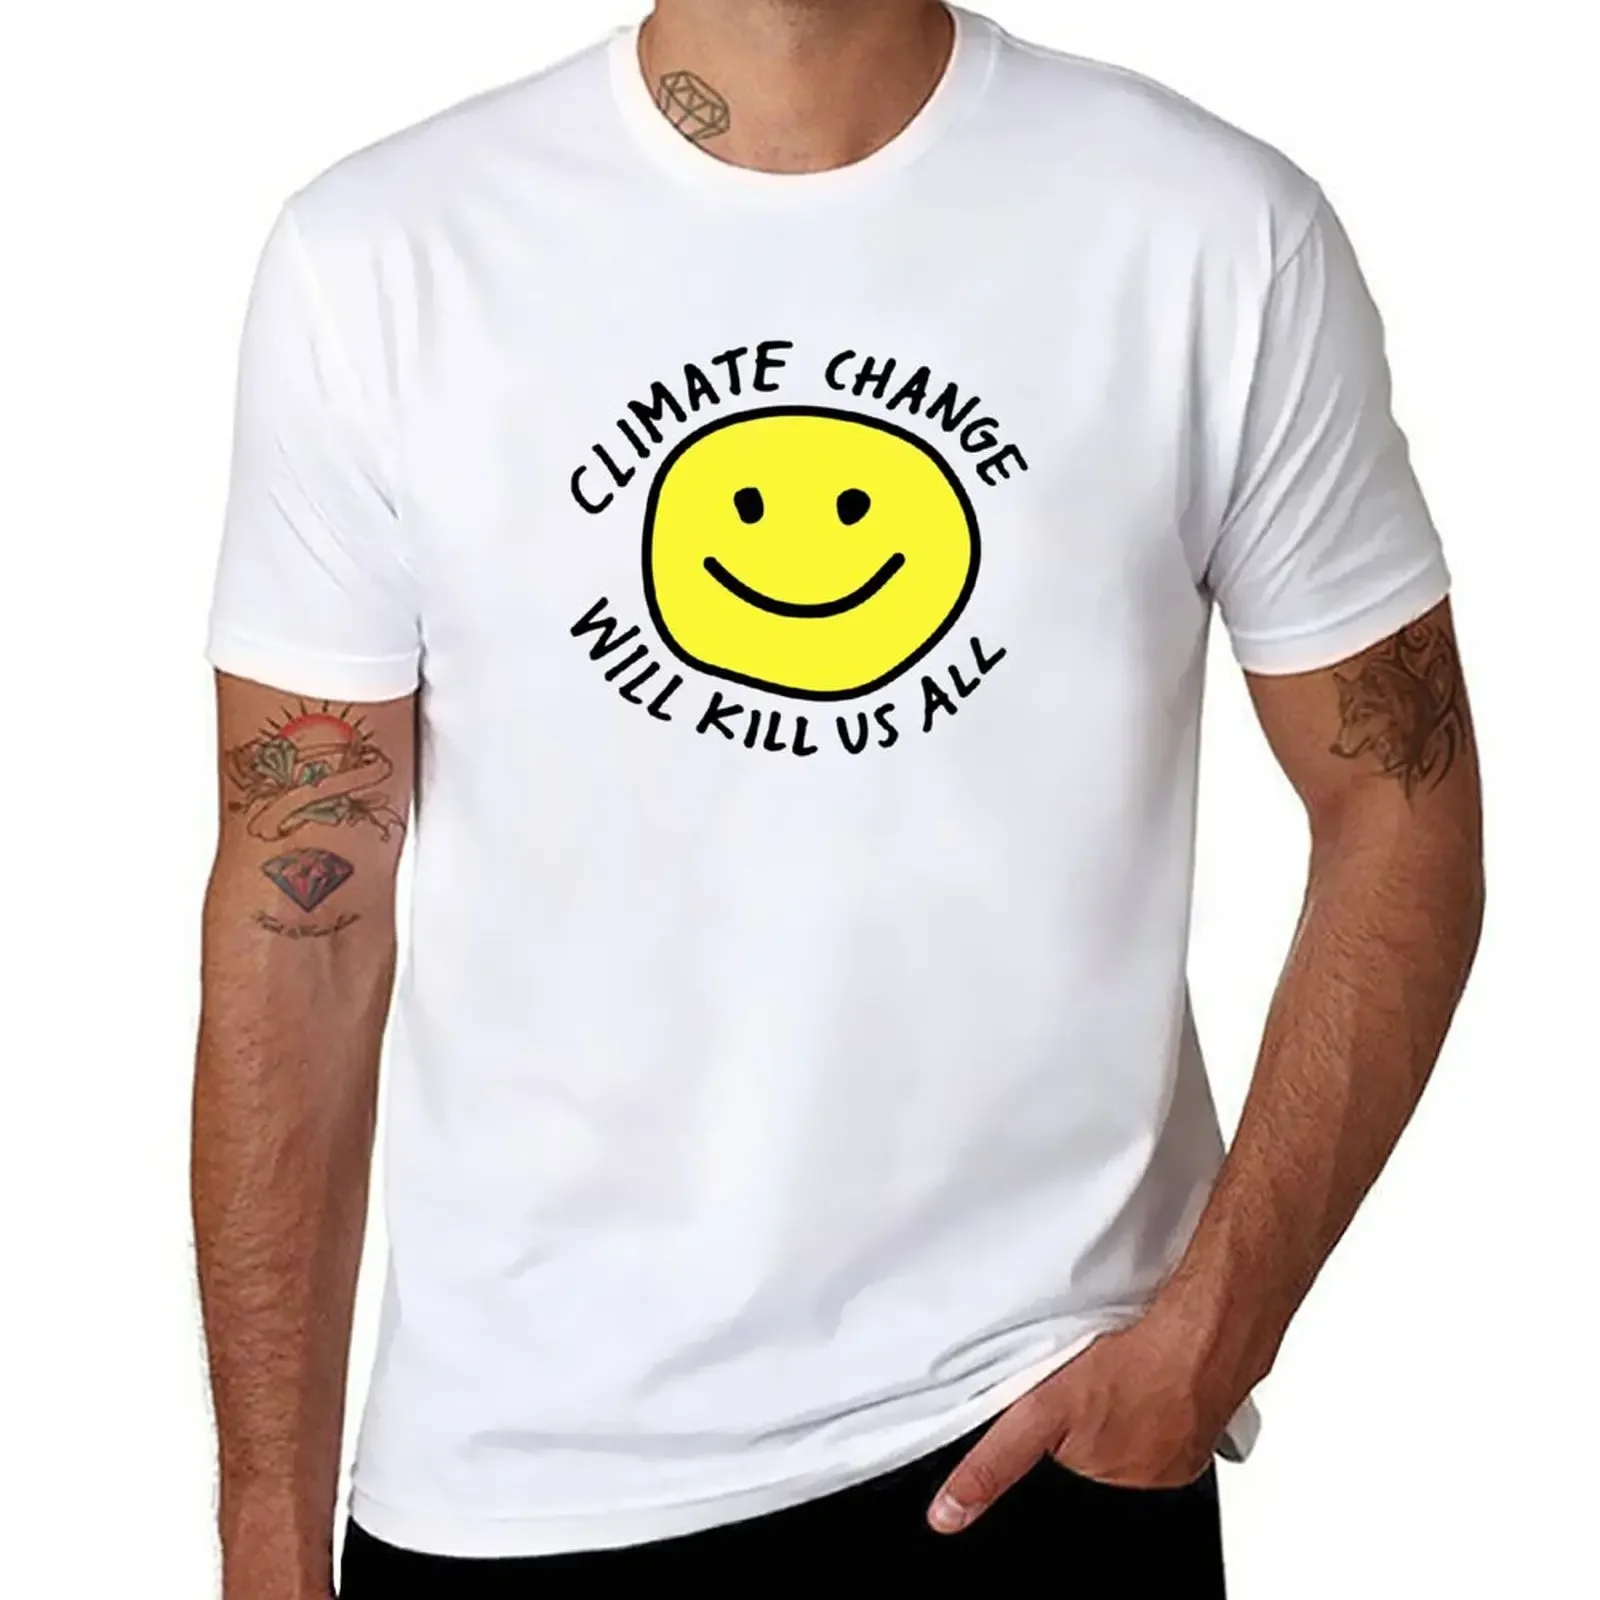 

Stop Climate Change T-Shirt quick-drying customizeds funnys black t shirts for men